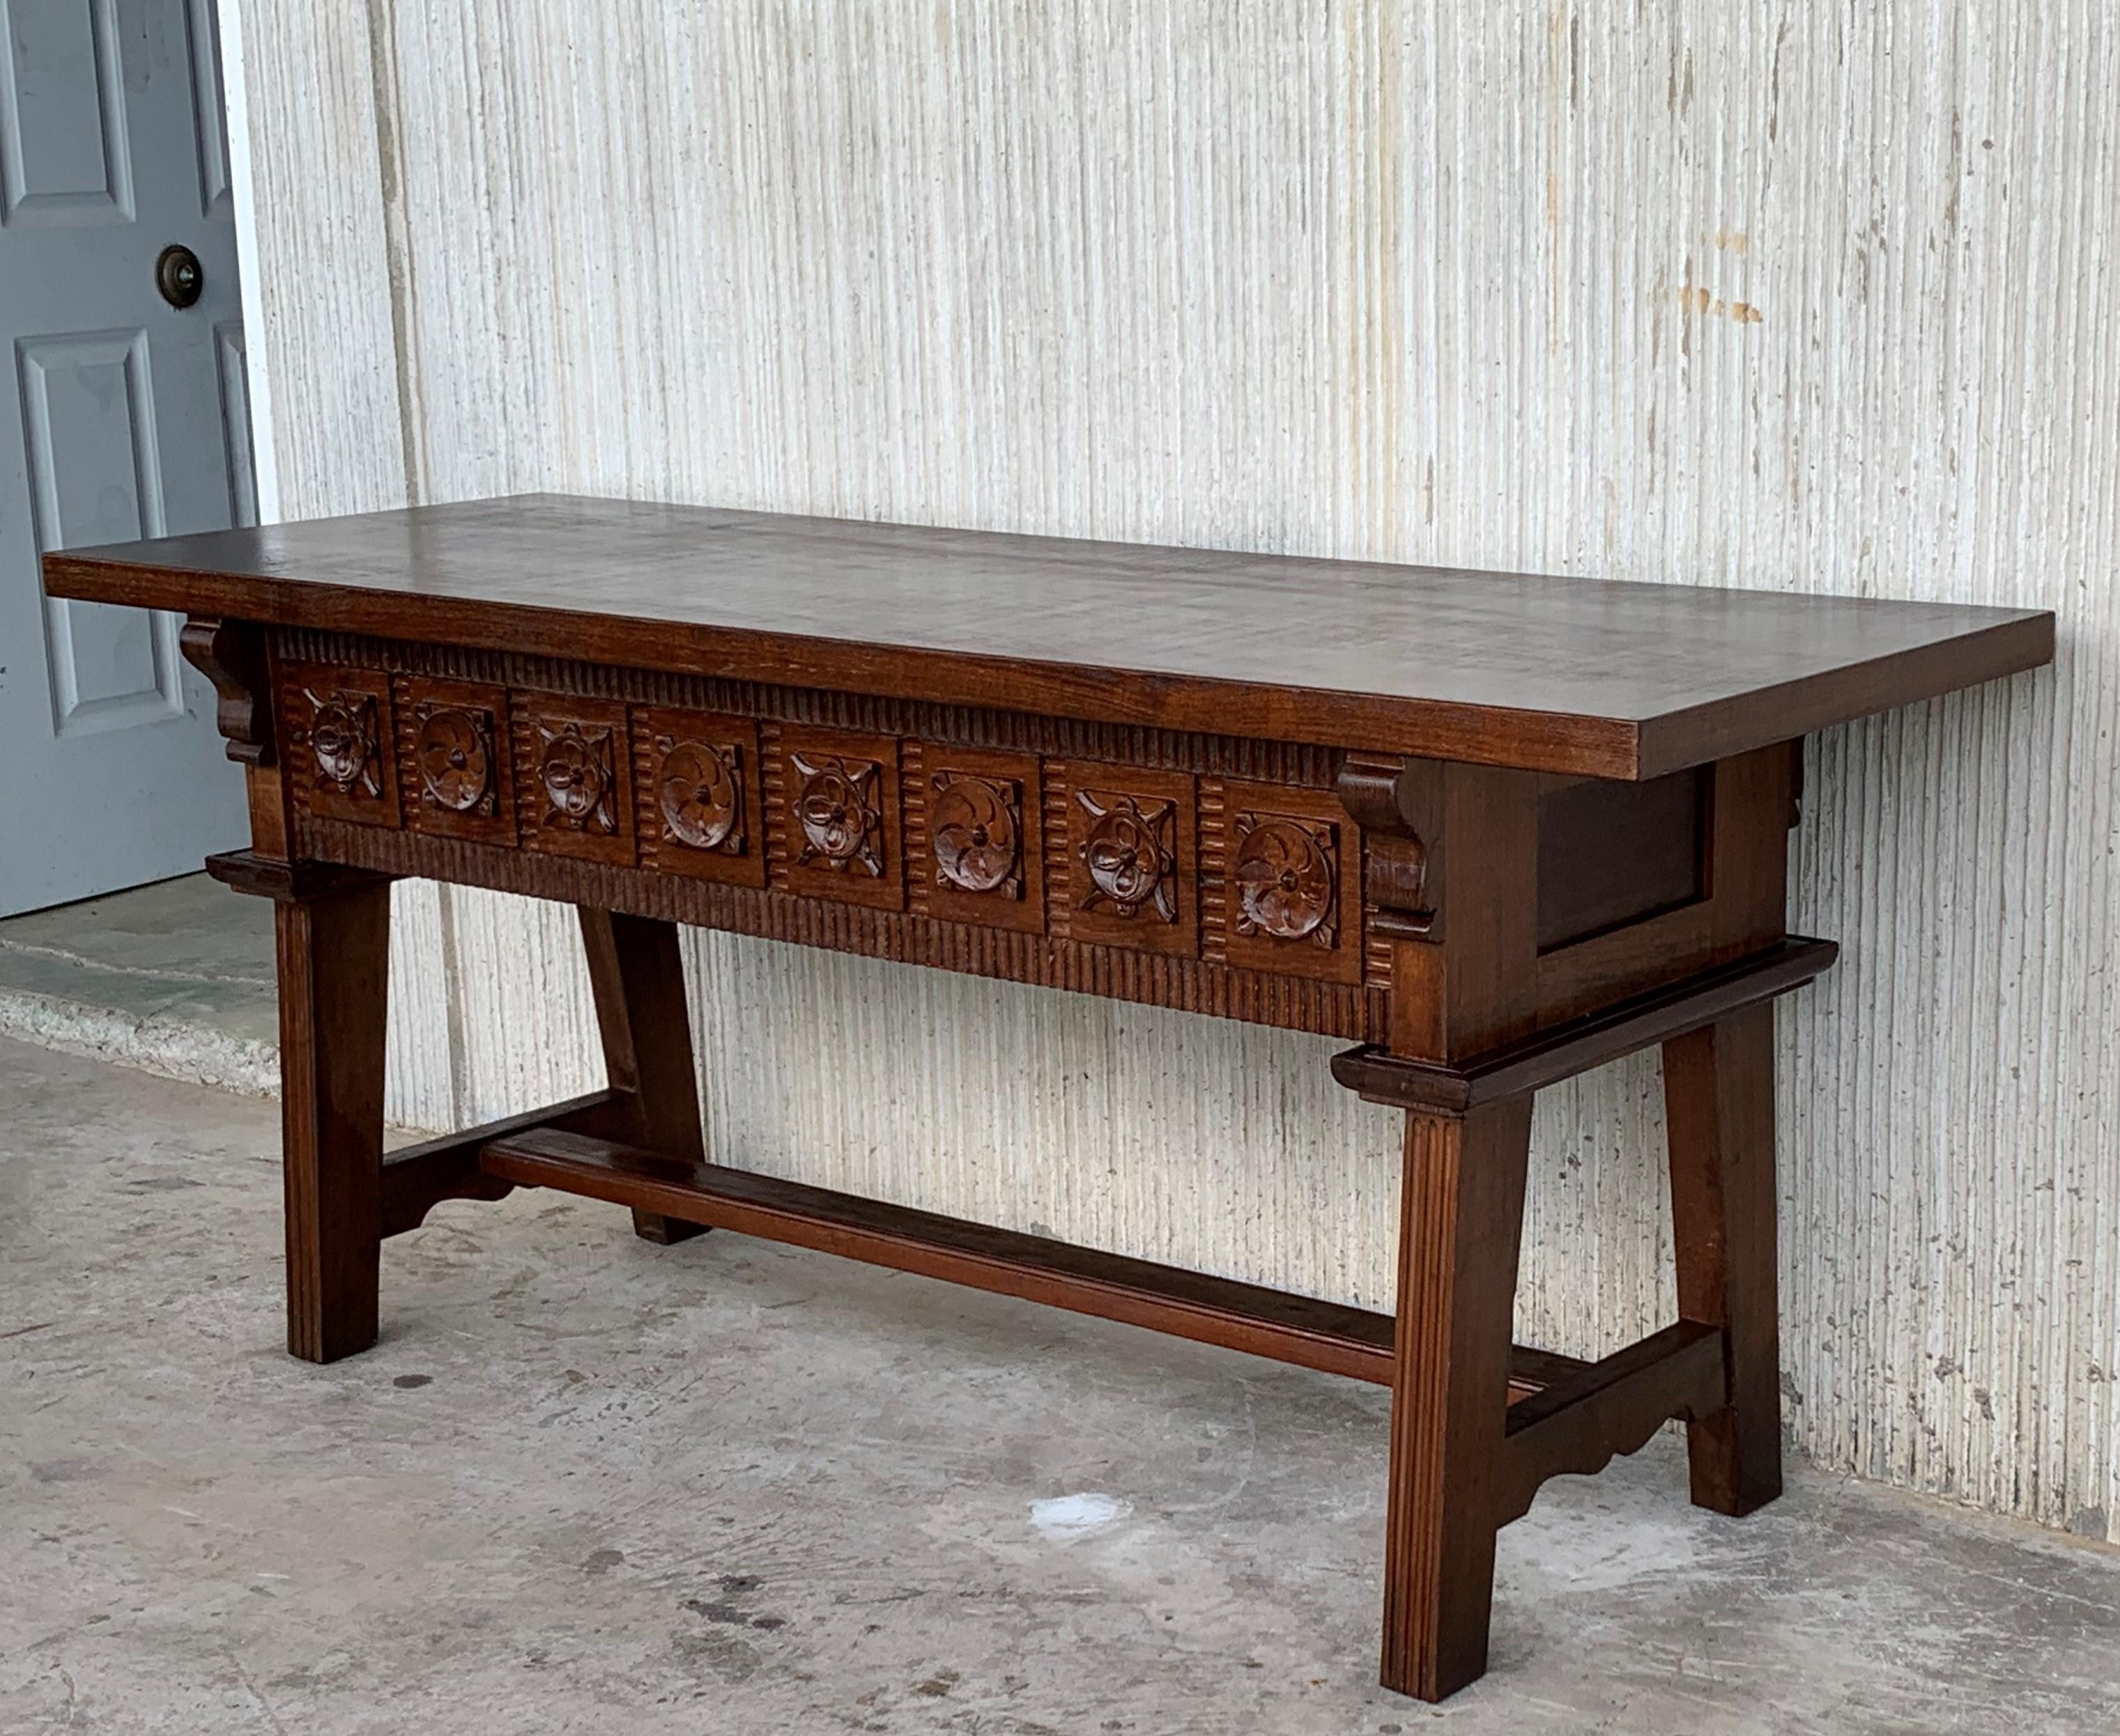 20th century Spanish Baroque carved walnut refectory table with the same carved in front and back
Solid wood and Beautiful legs.
One piece top.
Original iron hardware.
We acquired this items in Segovia, Spain

Completely restored.